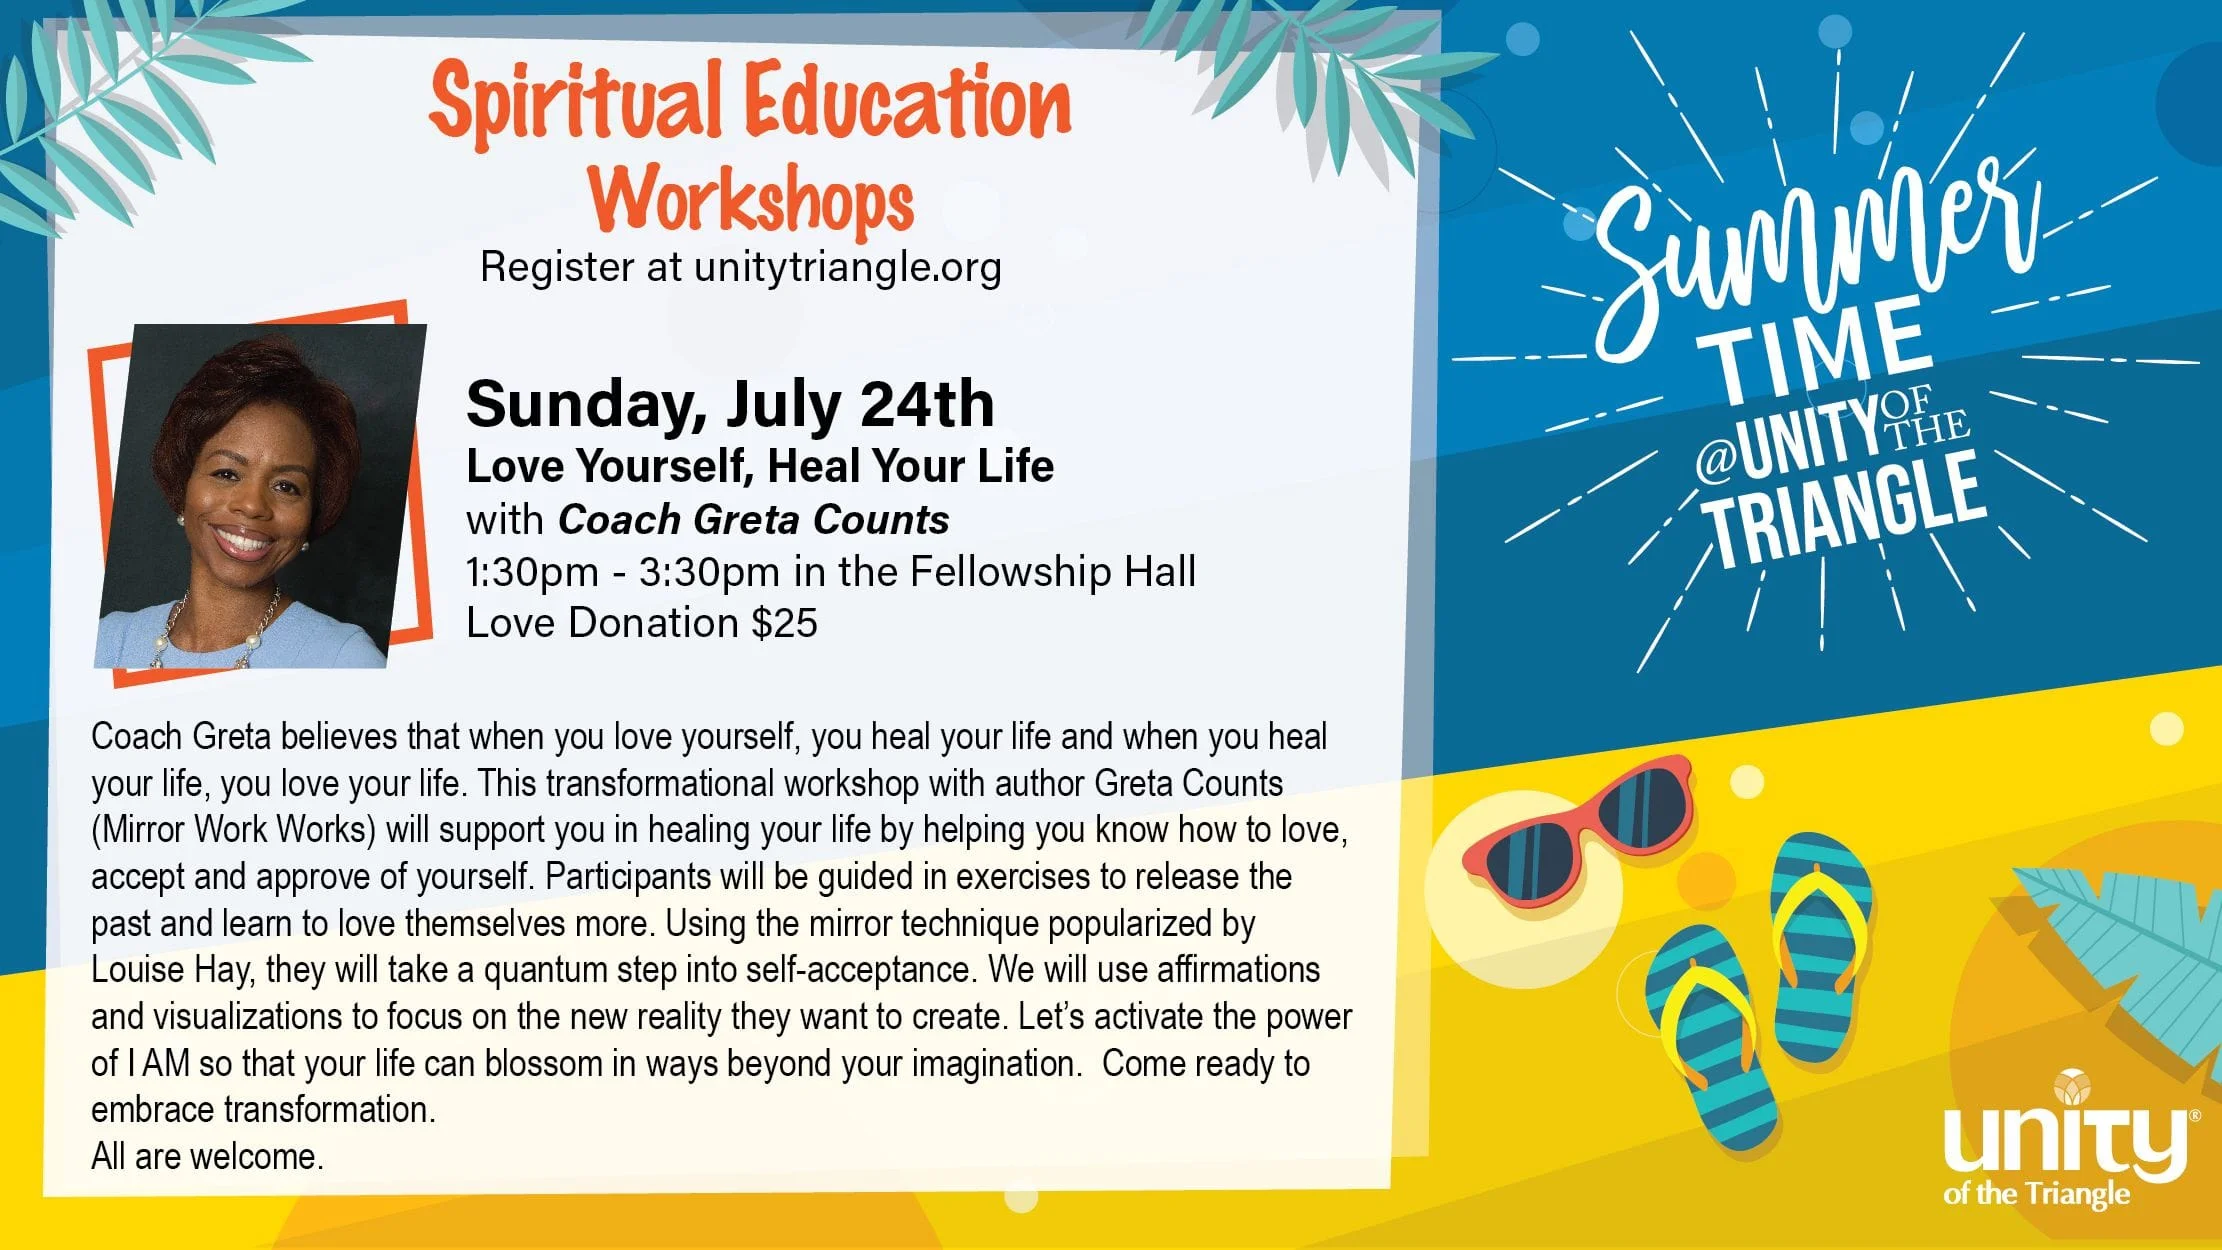 Love Yourself, Heal Your Life - Spiritual Education Workshop